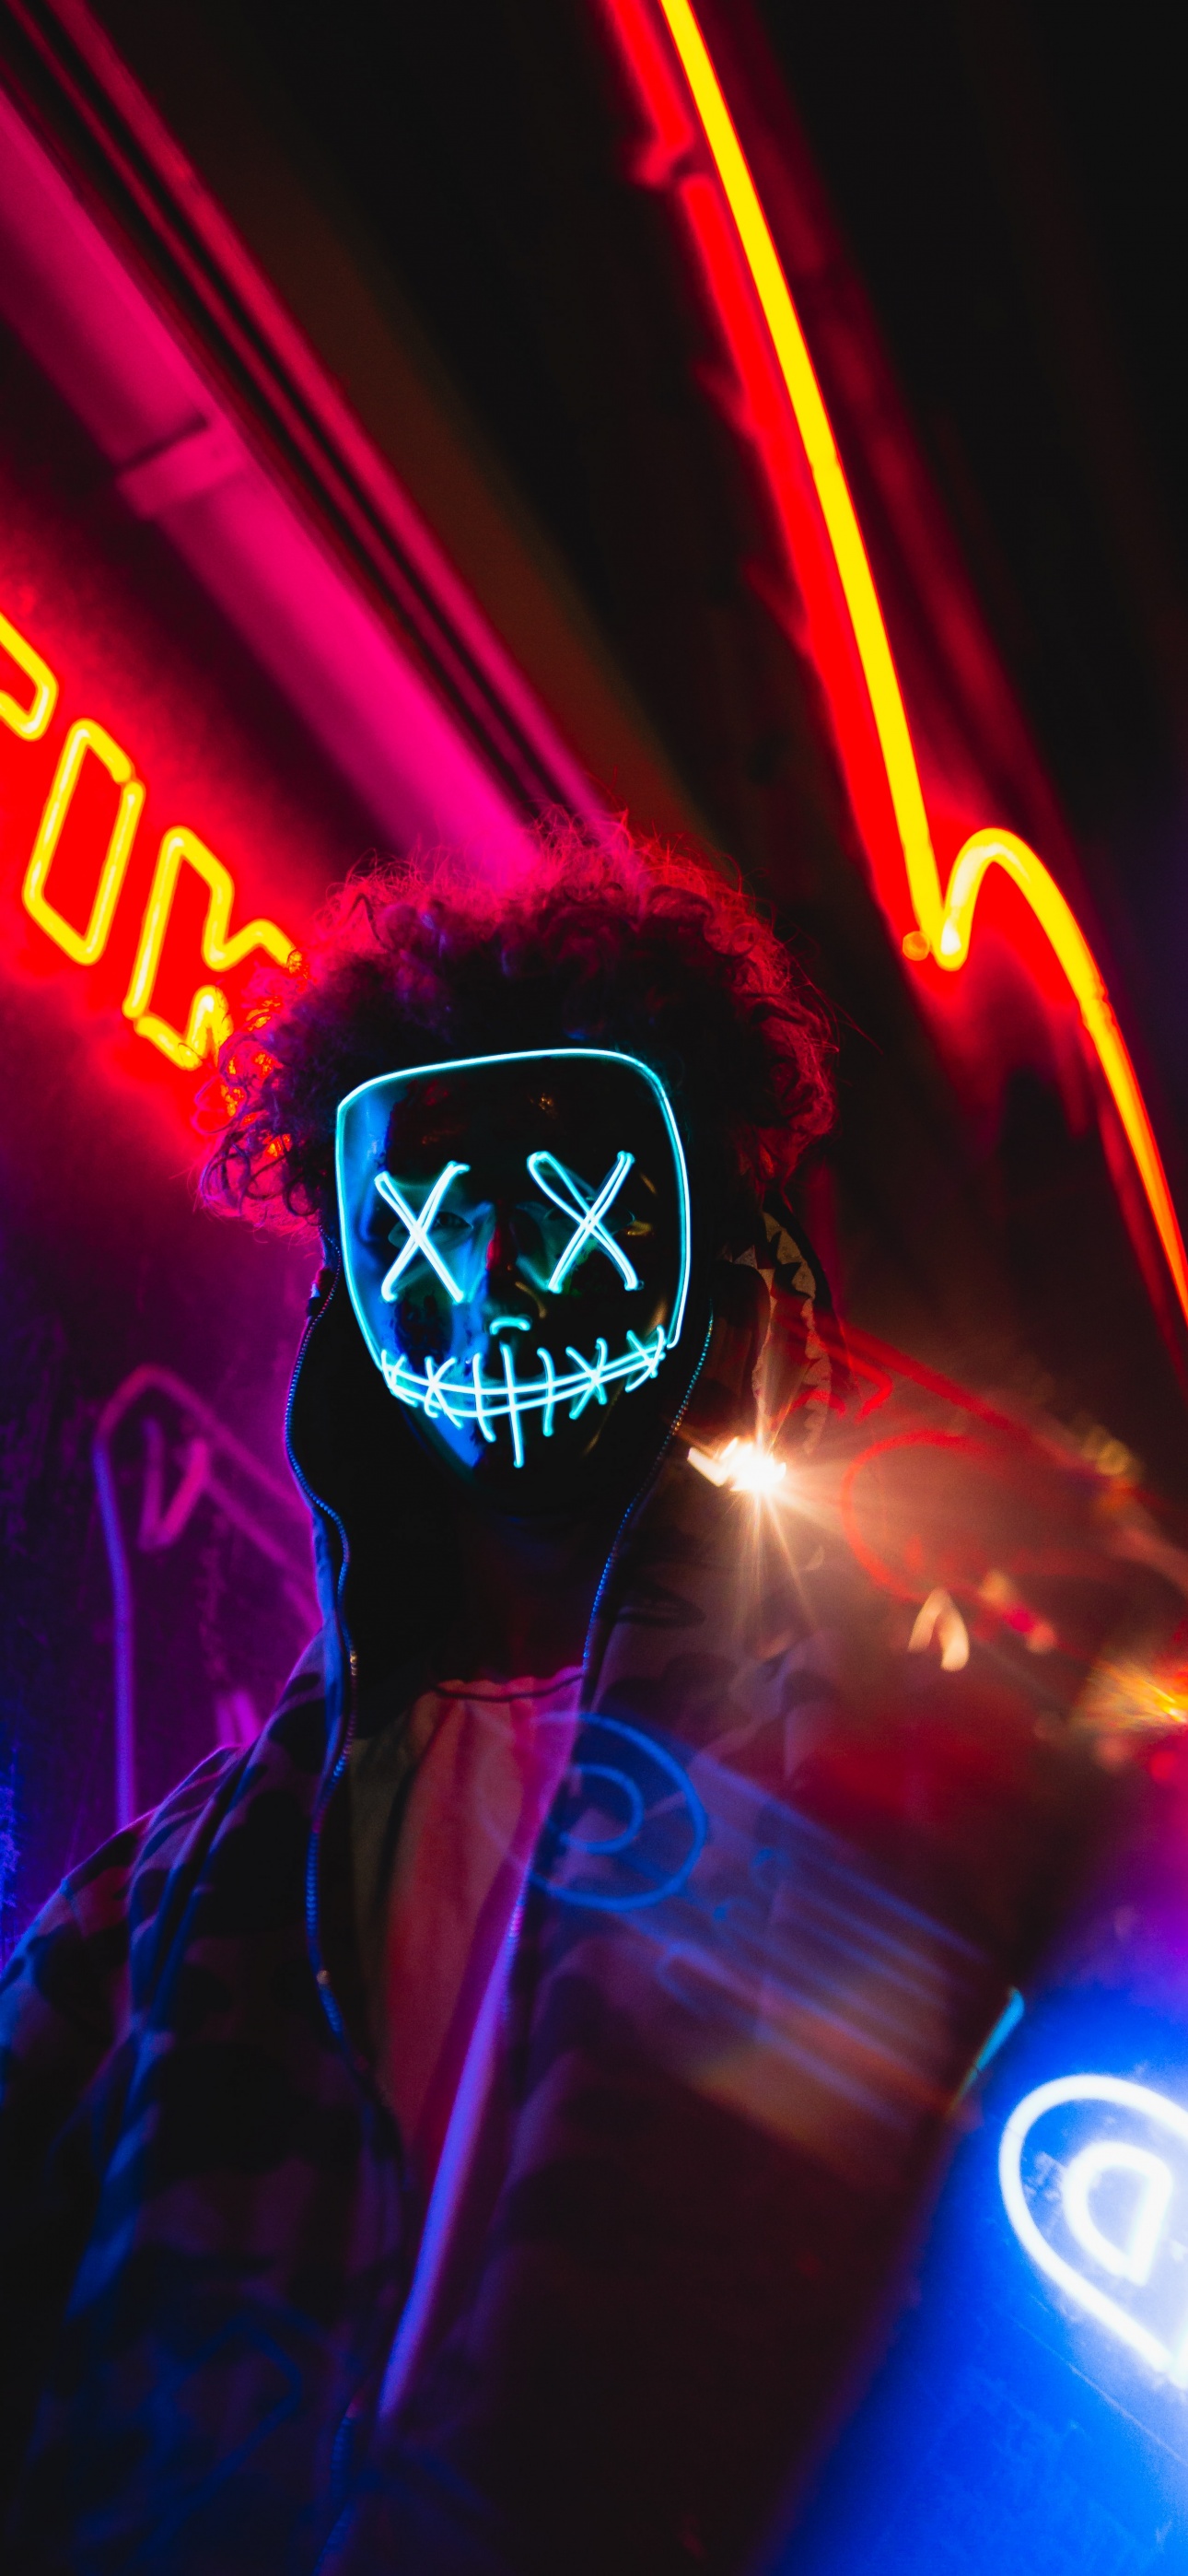 HD Neon Mask wallpaper - Download High-Quality Images